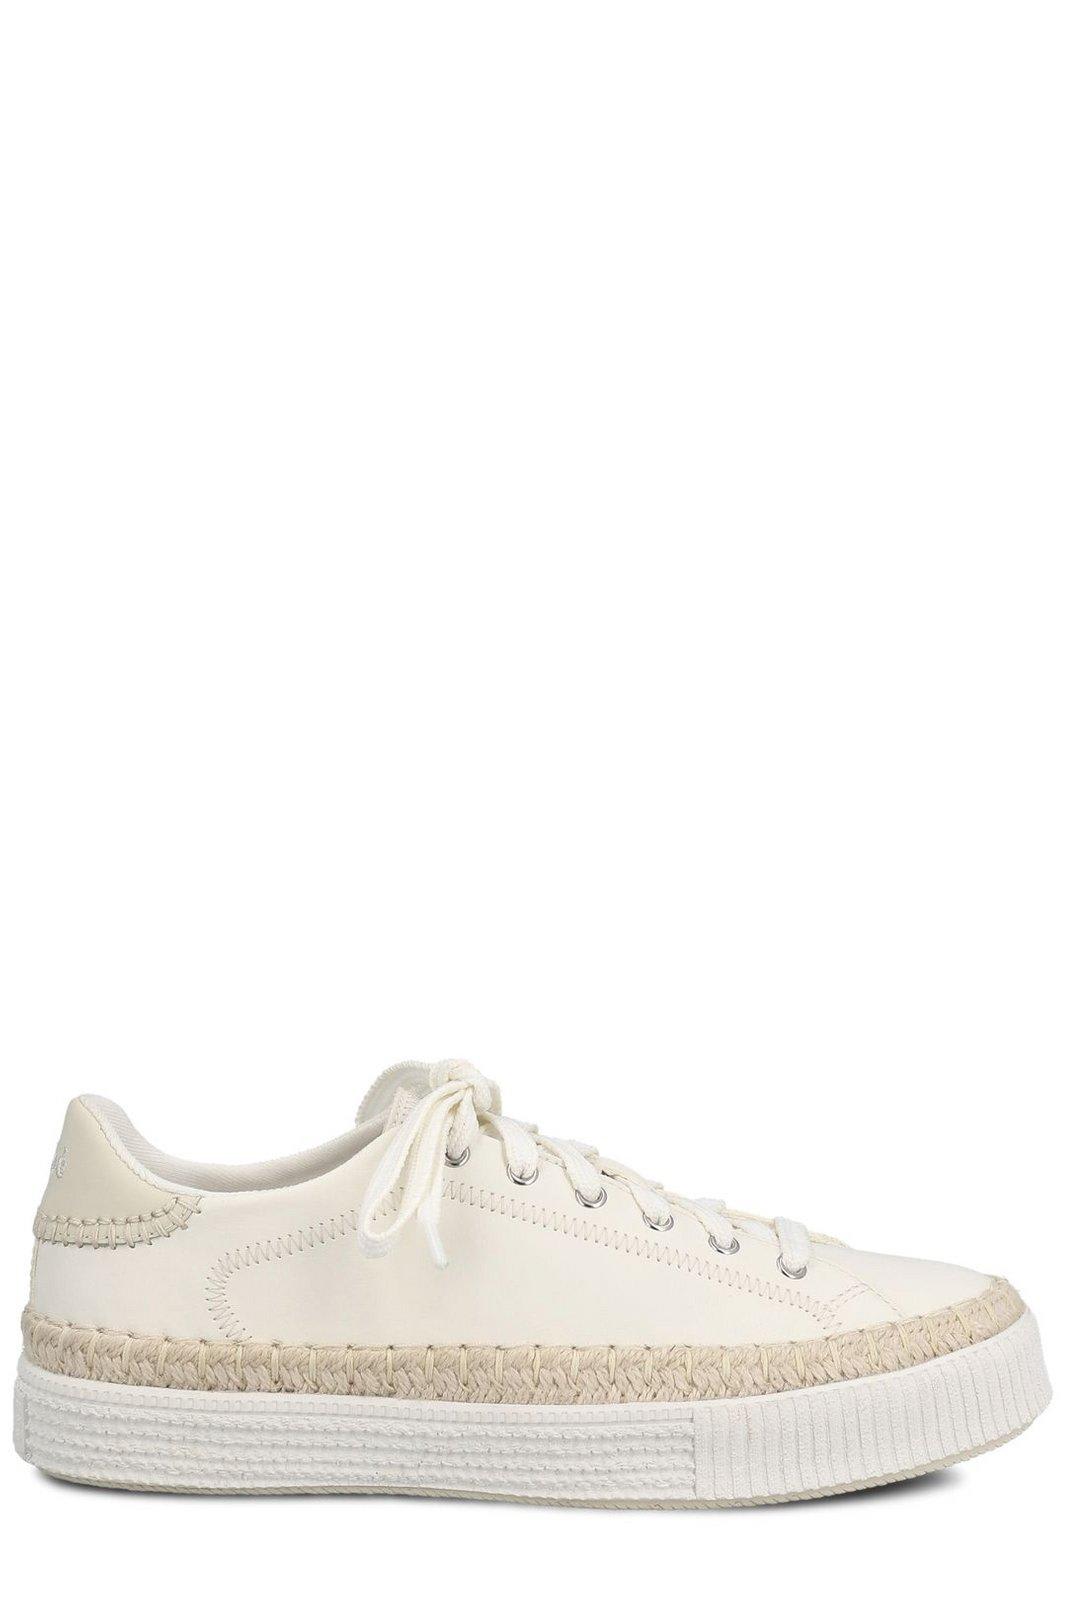 Chloé Telma Lace-up Sneakers